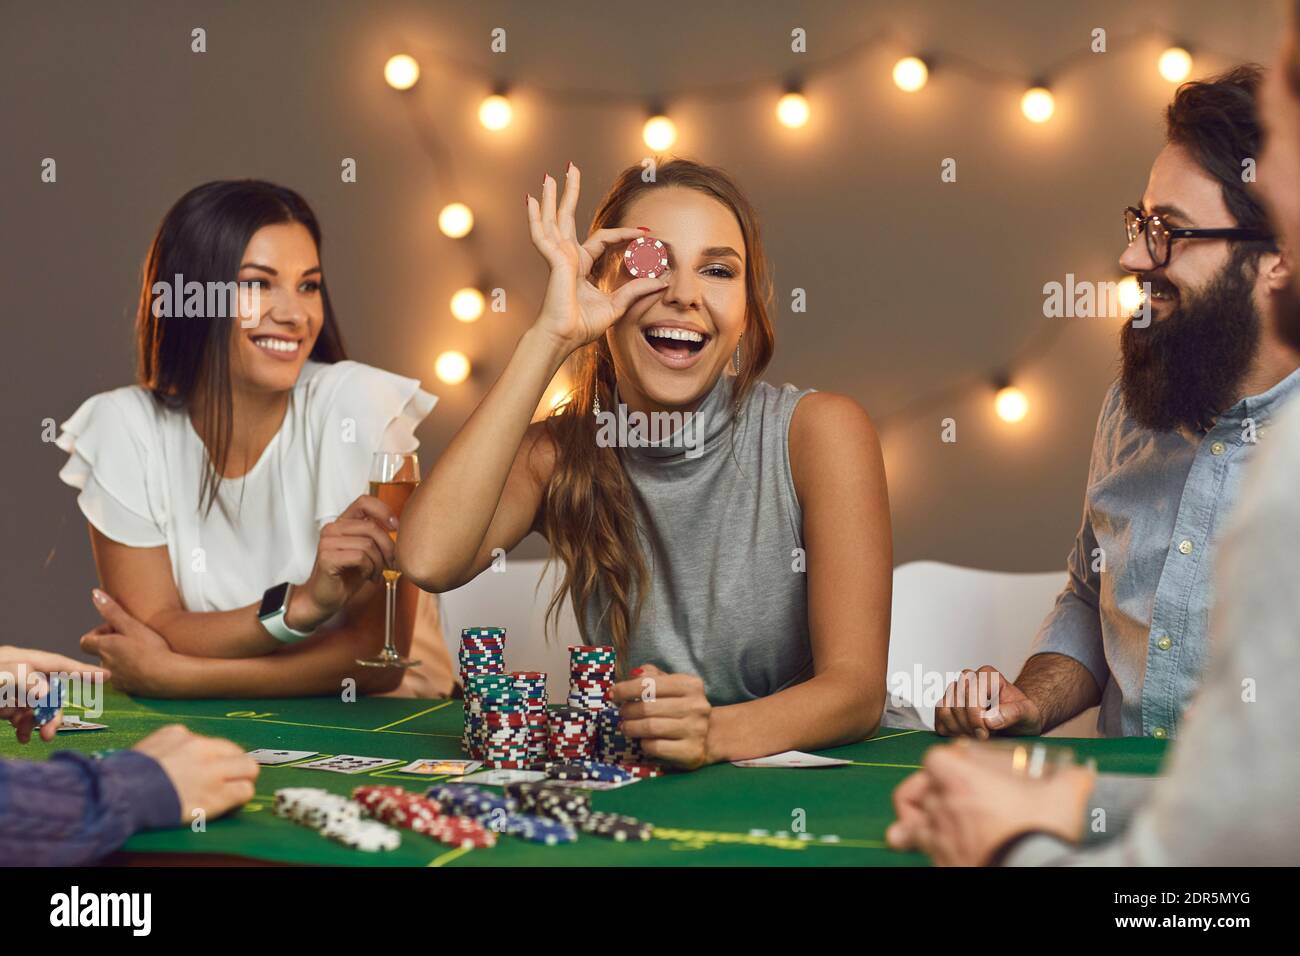 Group of smiling friends playing board games with chips at home Stock Photo